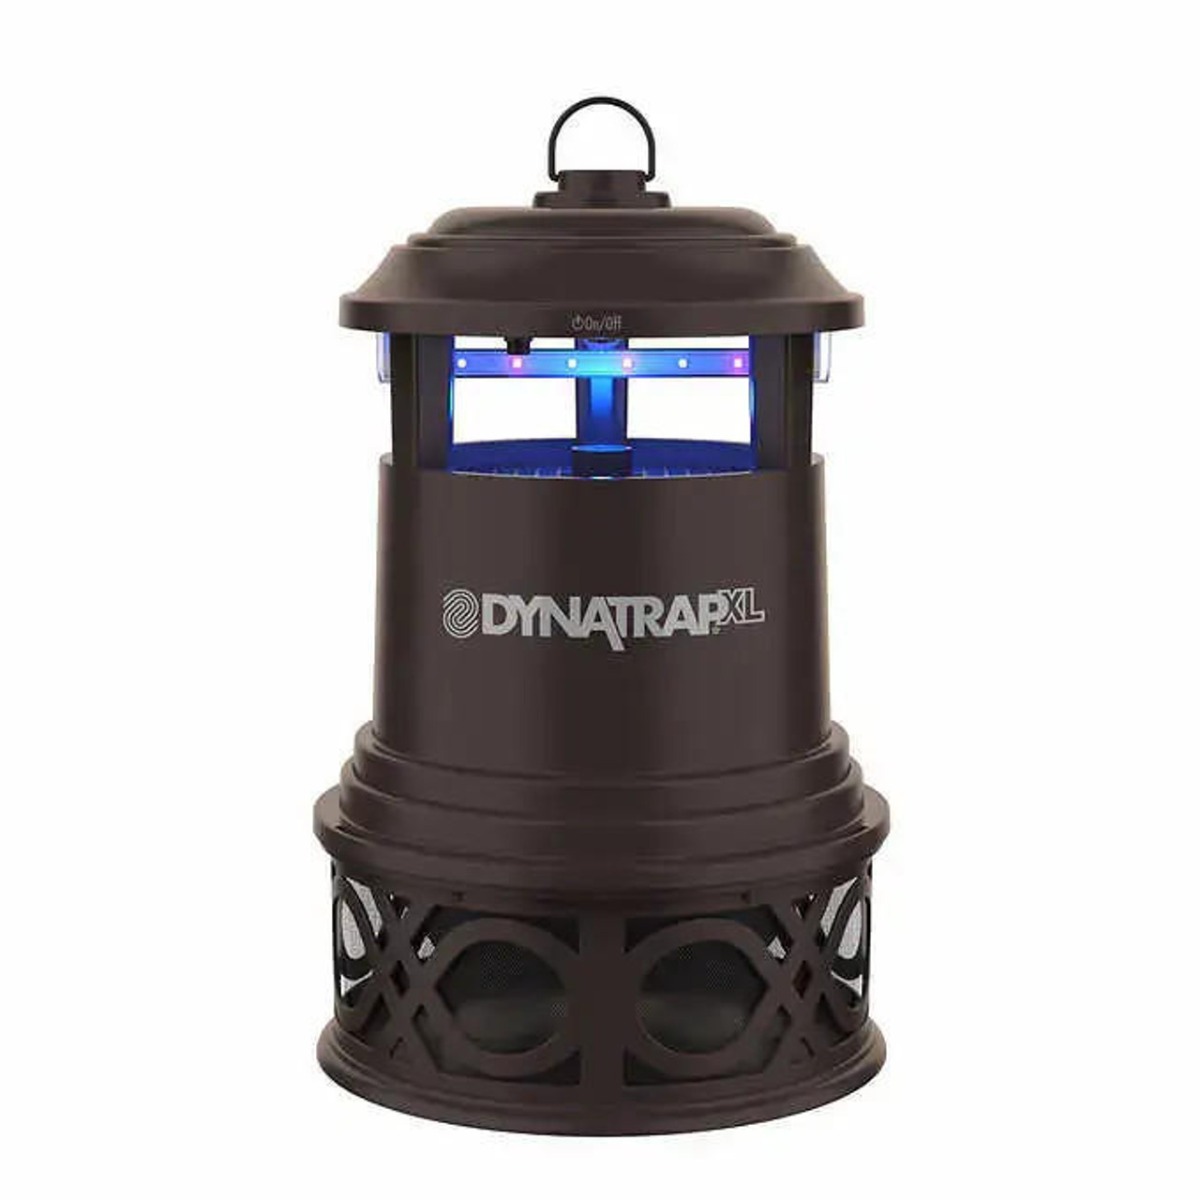 DynaTrap XL 1 Acre Indoor/Outdoor Mosquito and Insect Trap